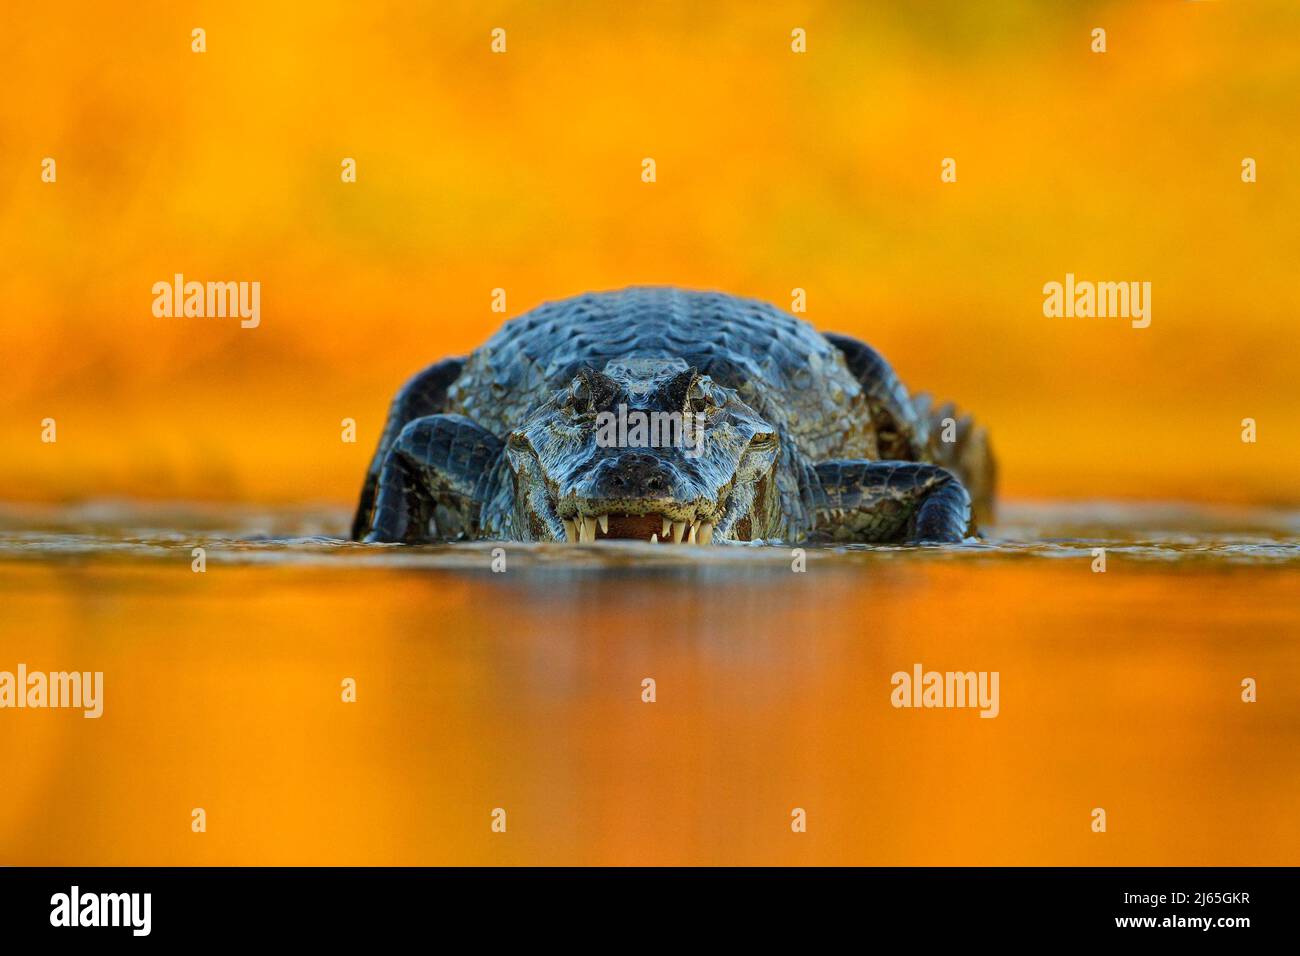 Caiman with evening orange sun, Yacare Caiman, crocodile in the river surface, animal in the water, face to face, nature habitat, Pantanal, Brazil Stock Photo